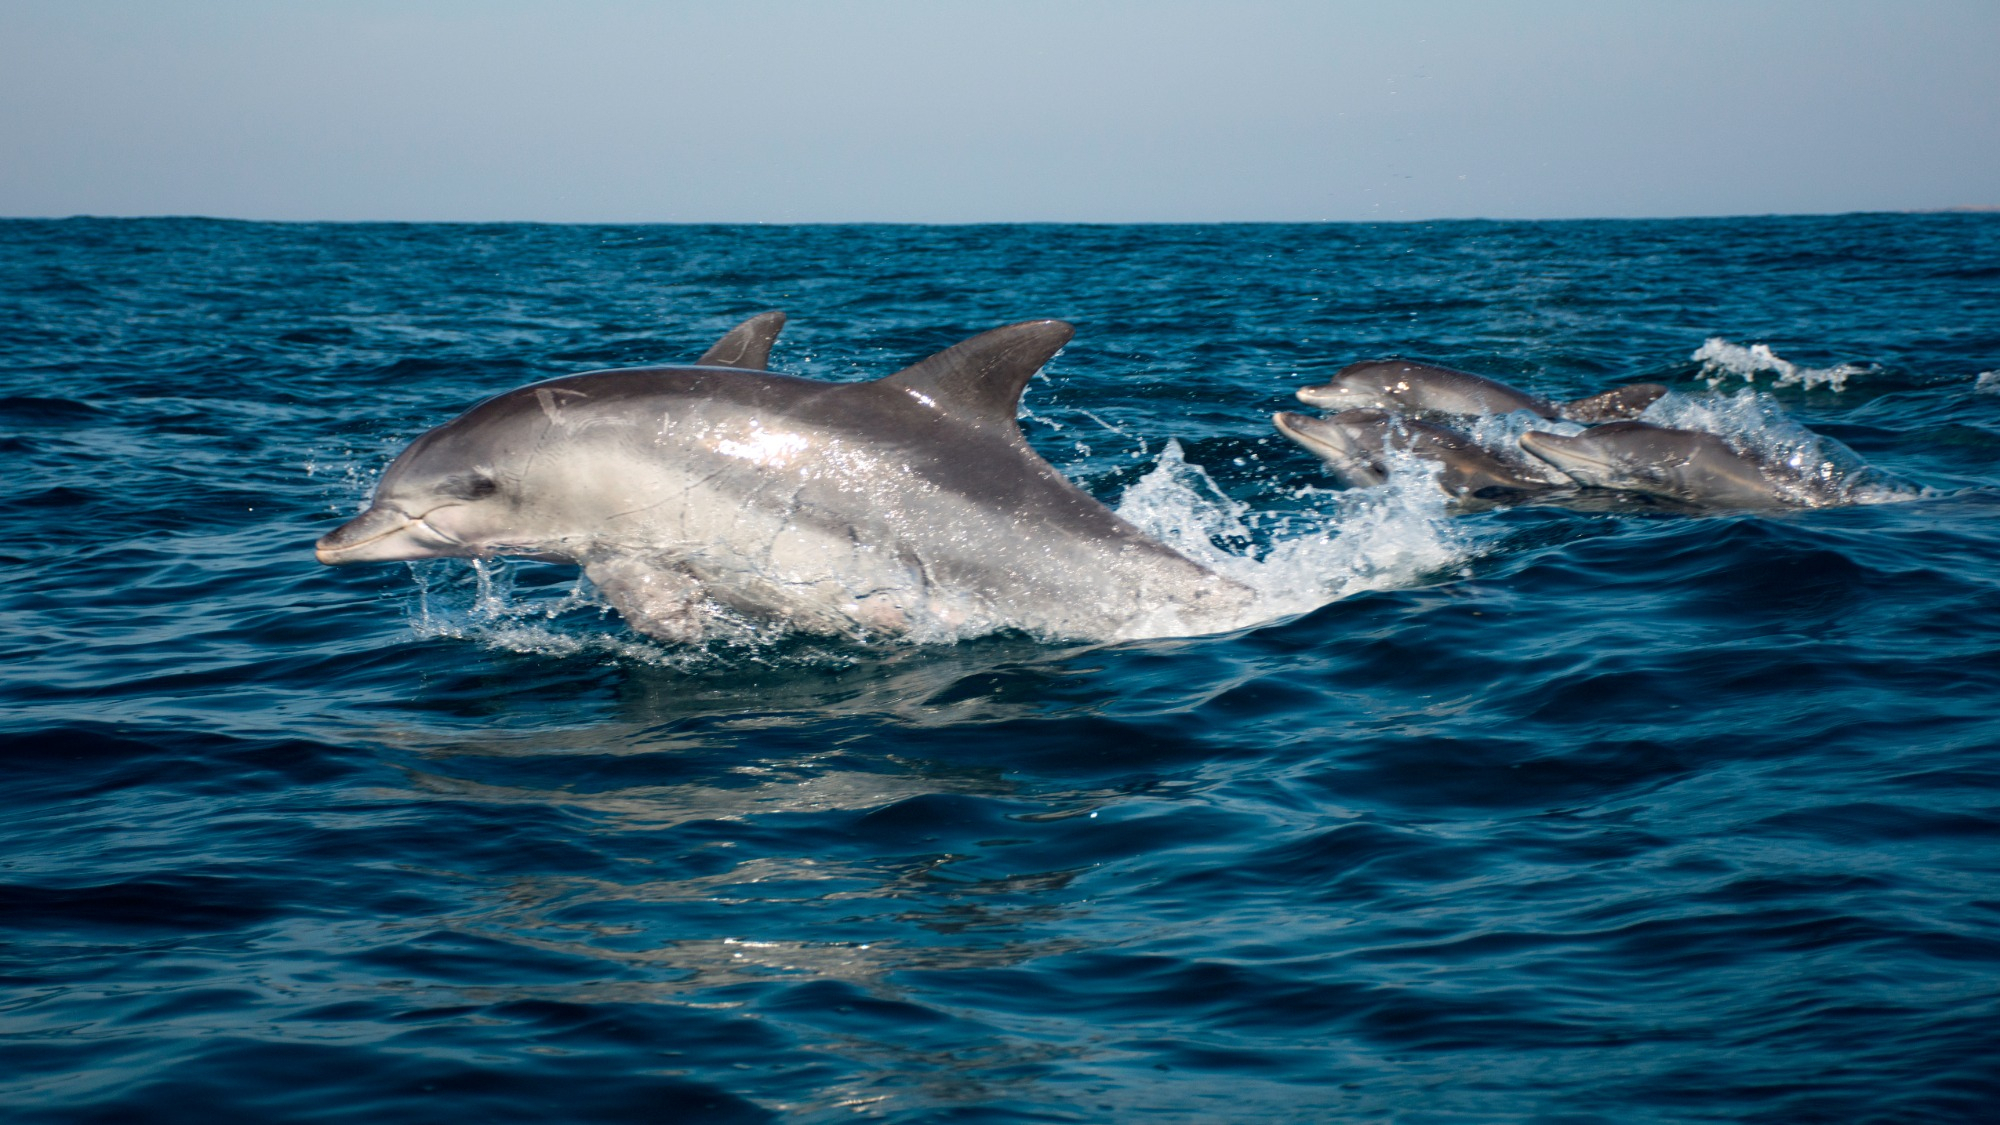 Drones are following dolphins to spy on their complex social lives